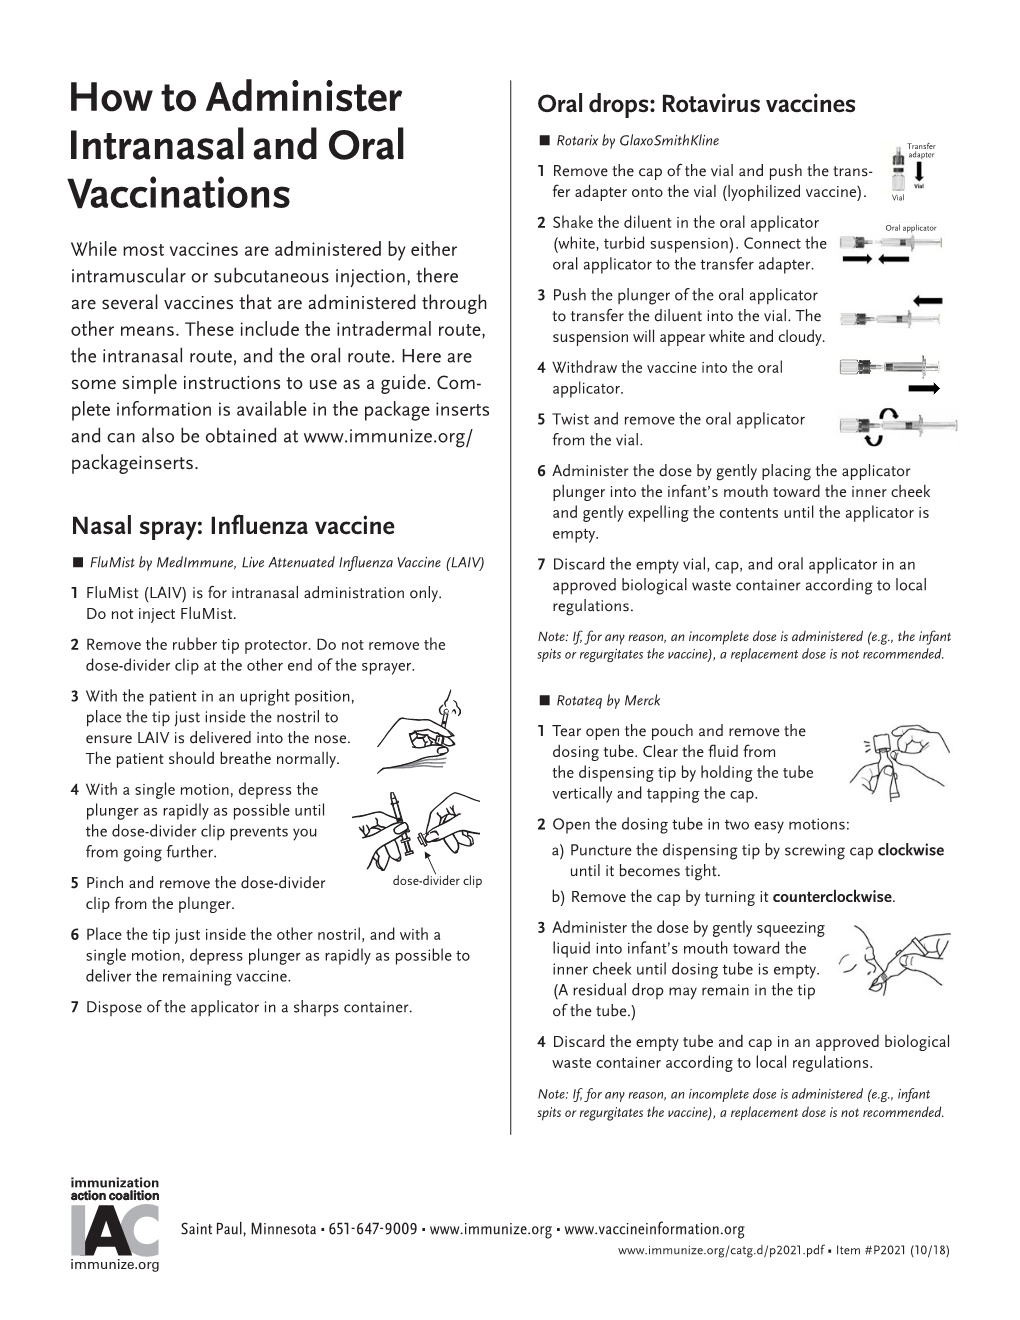 How to Administer Intranasal and Oral Vaccinations